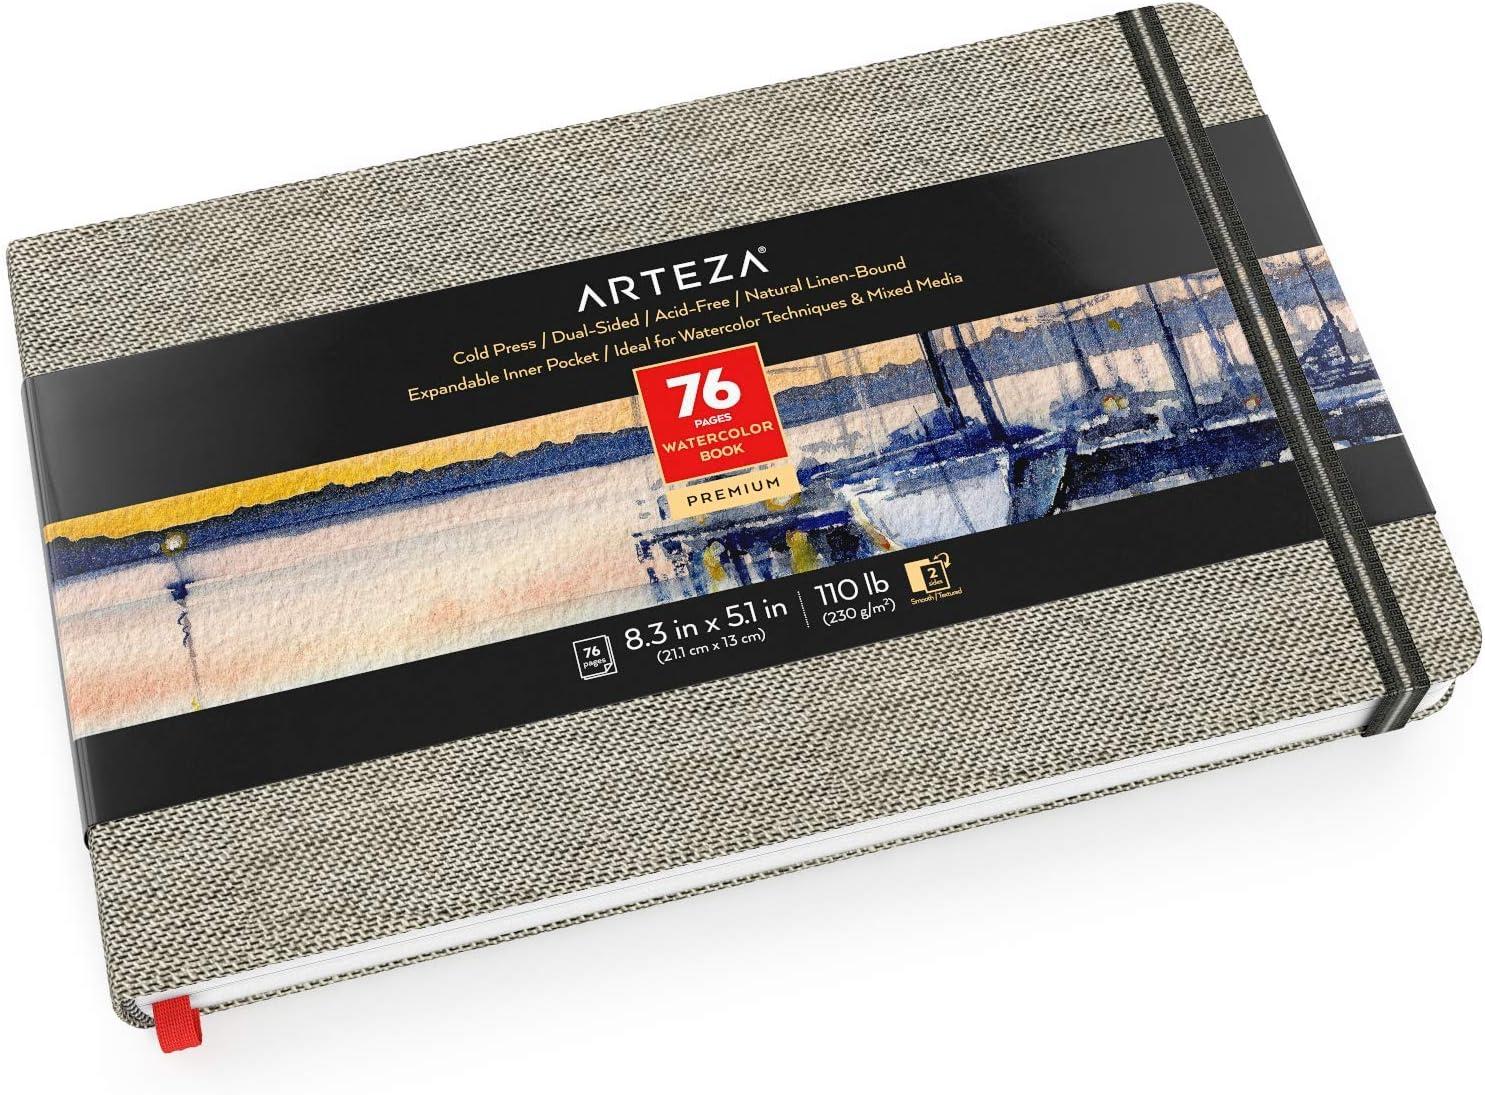 Arteza Watercolor Sketchbook, 8.3 x 5.1 Inches, 76-Page Journal